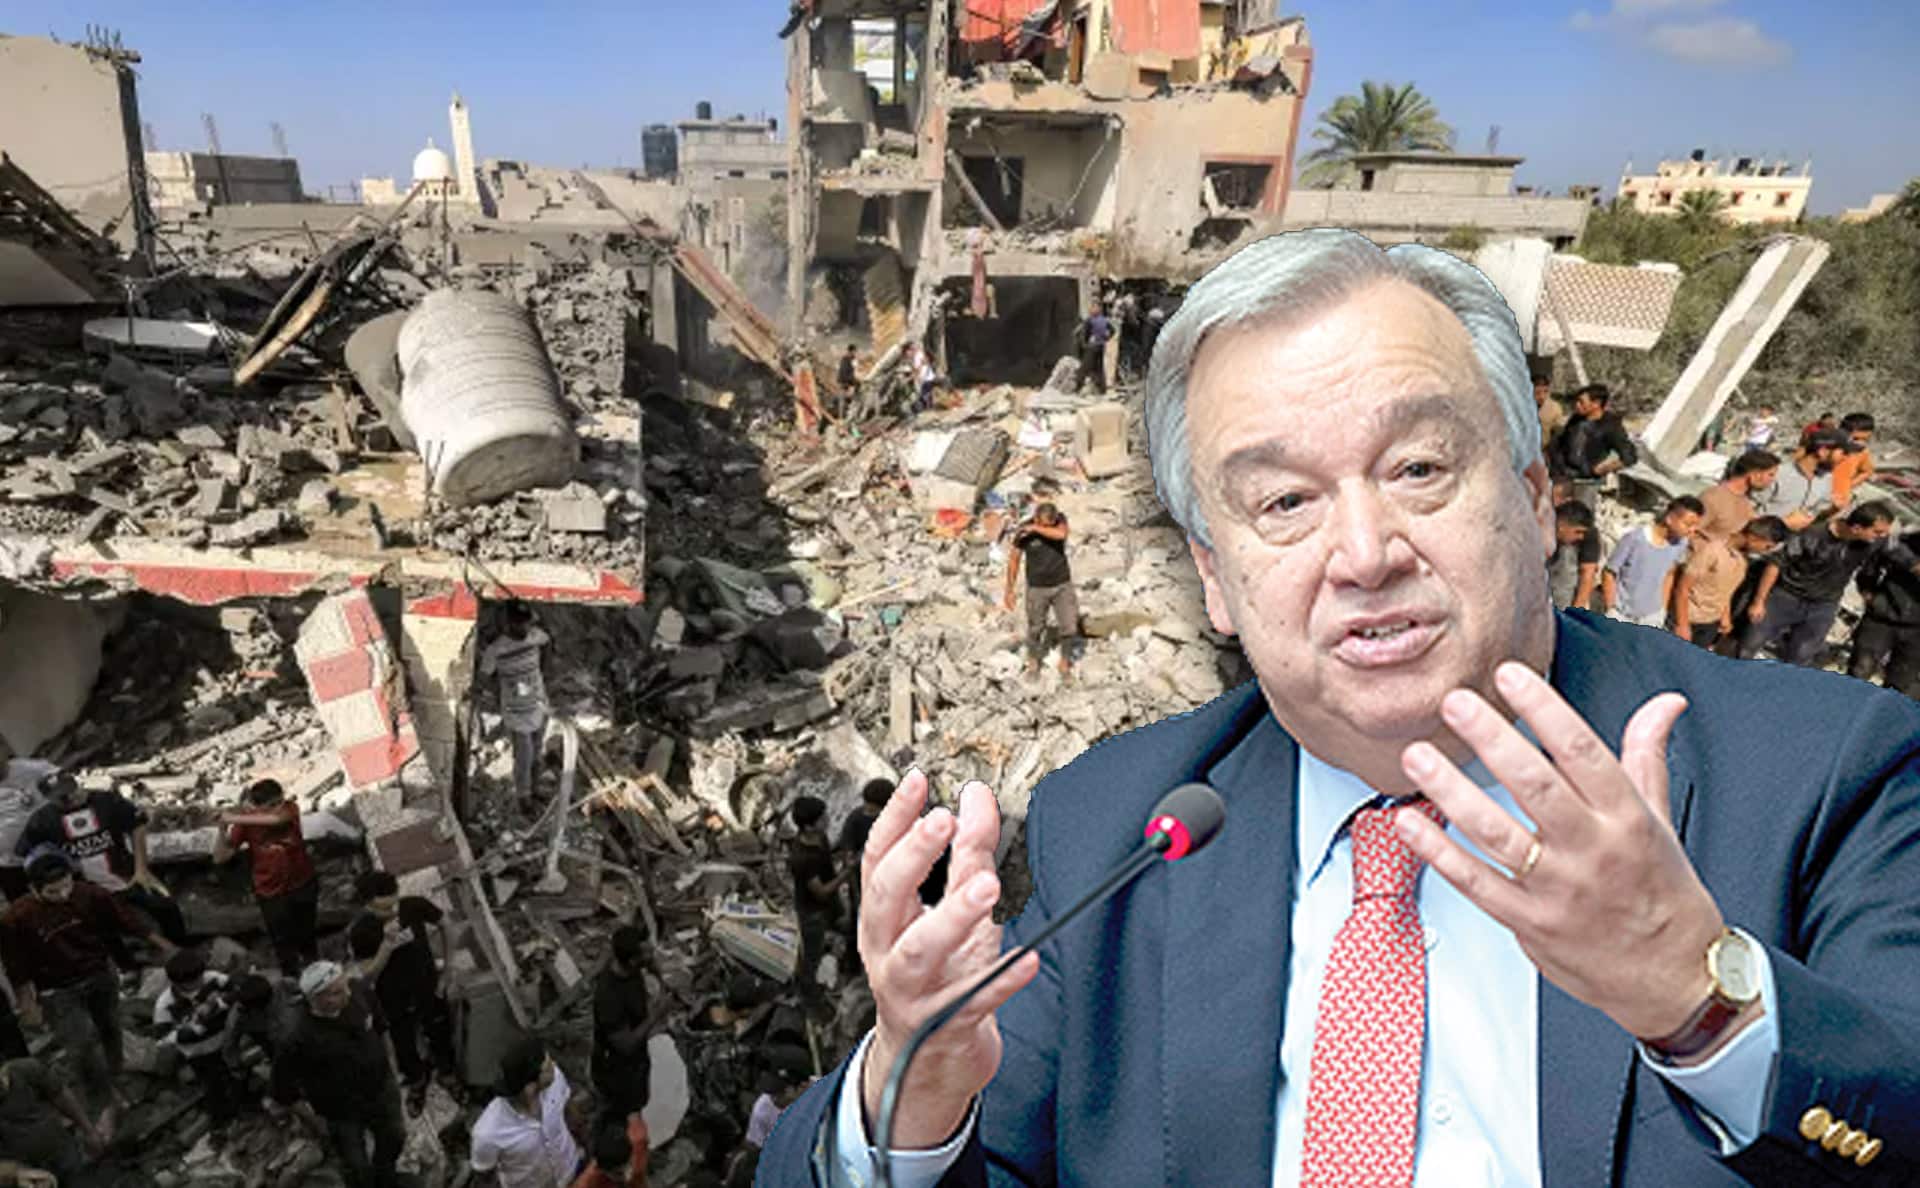 UN chief says Gaza deaths show something 'clearly wrong' with Israel